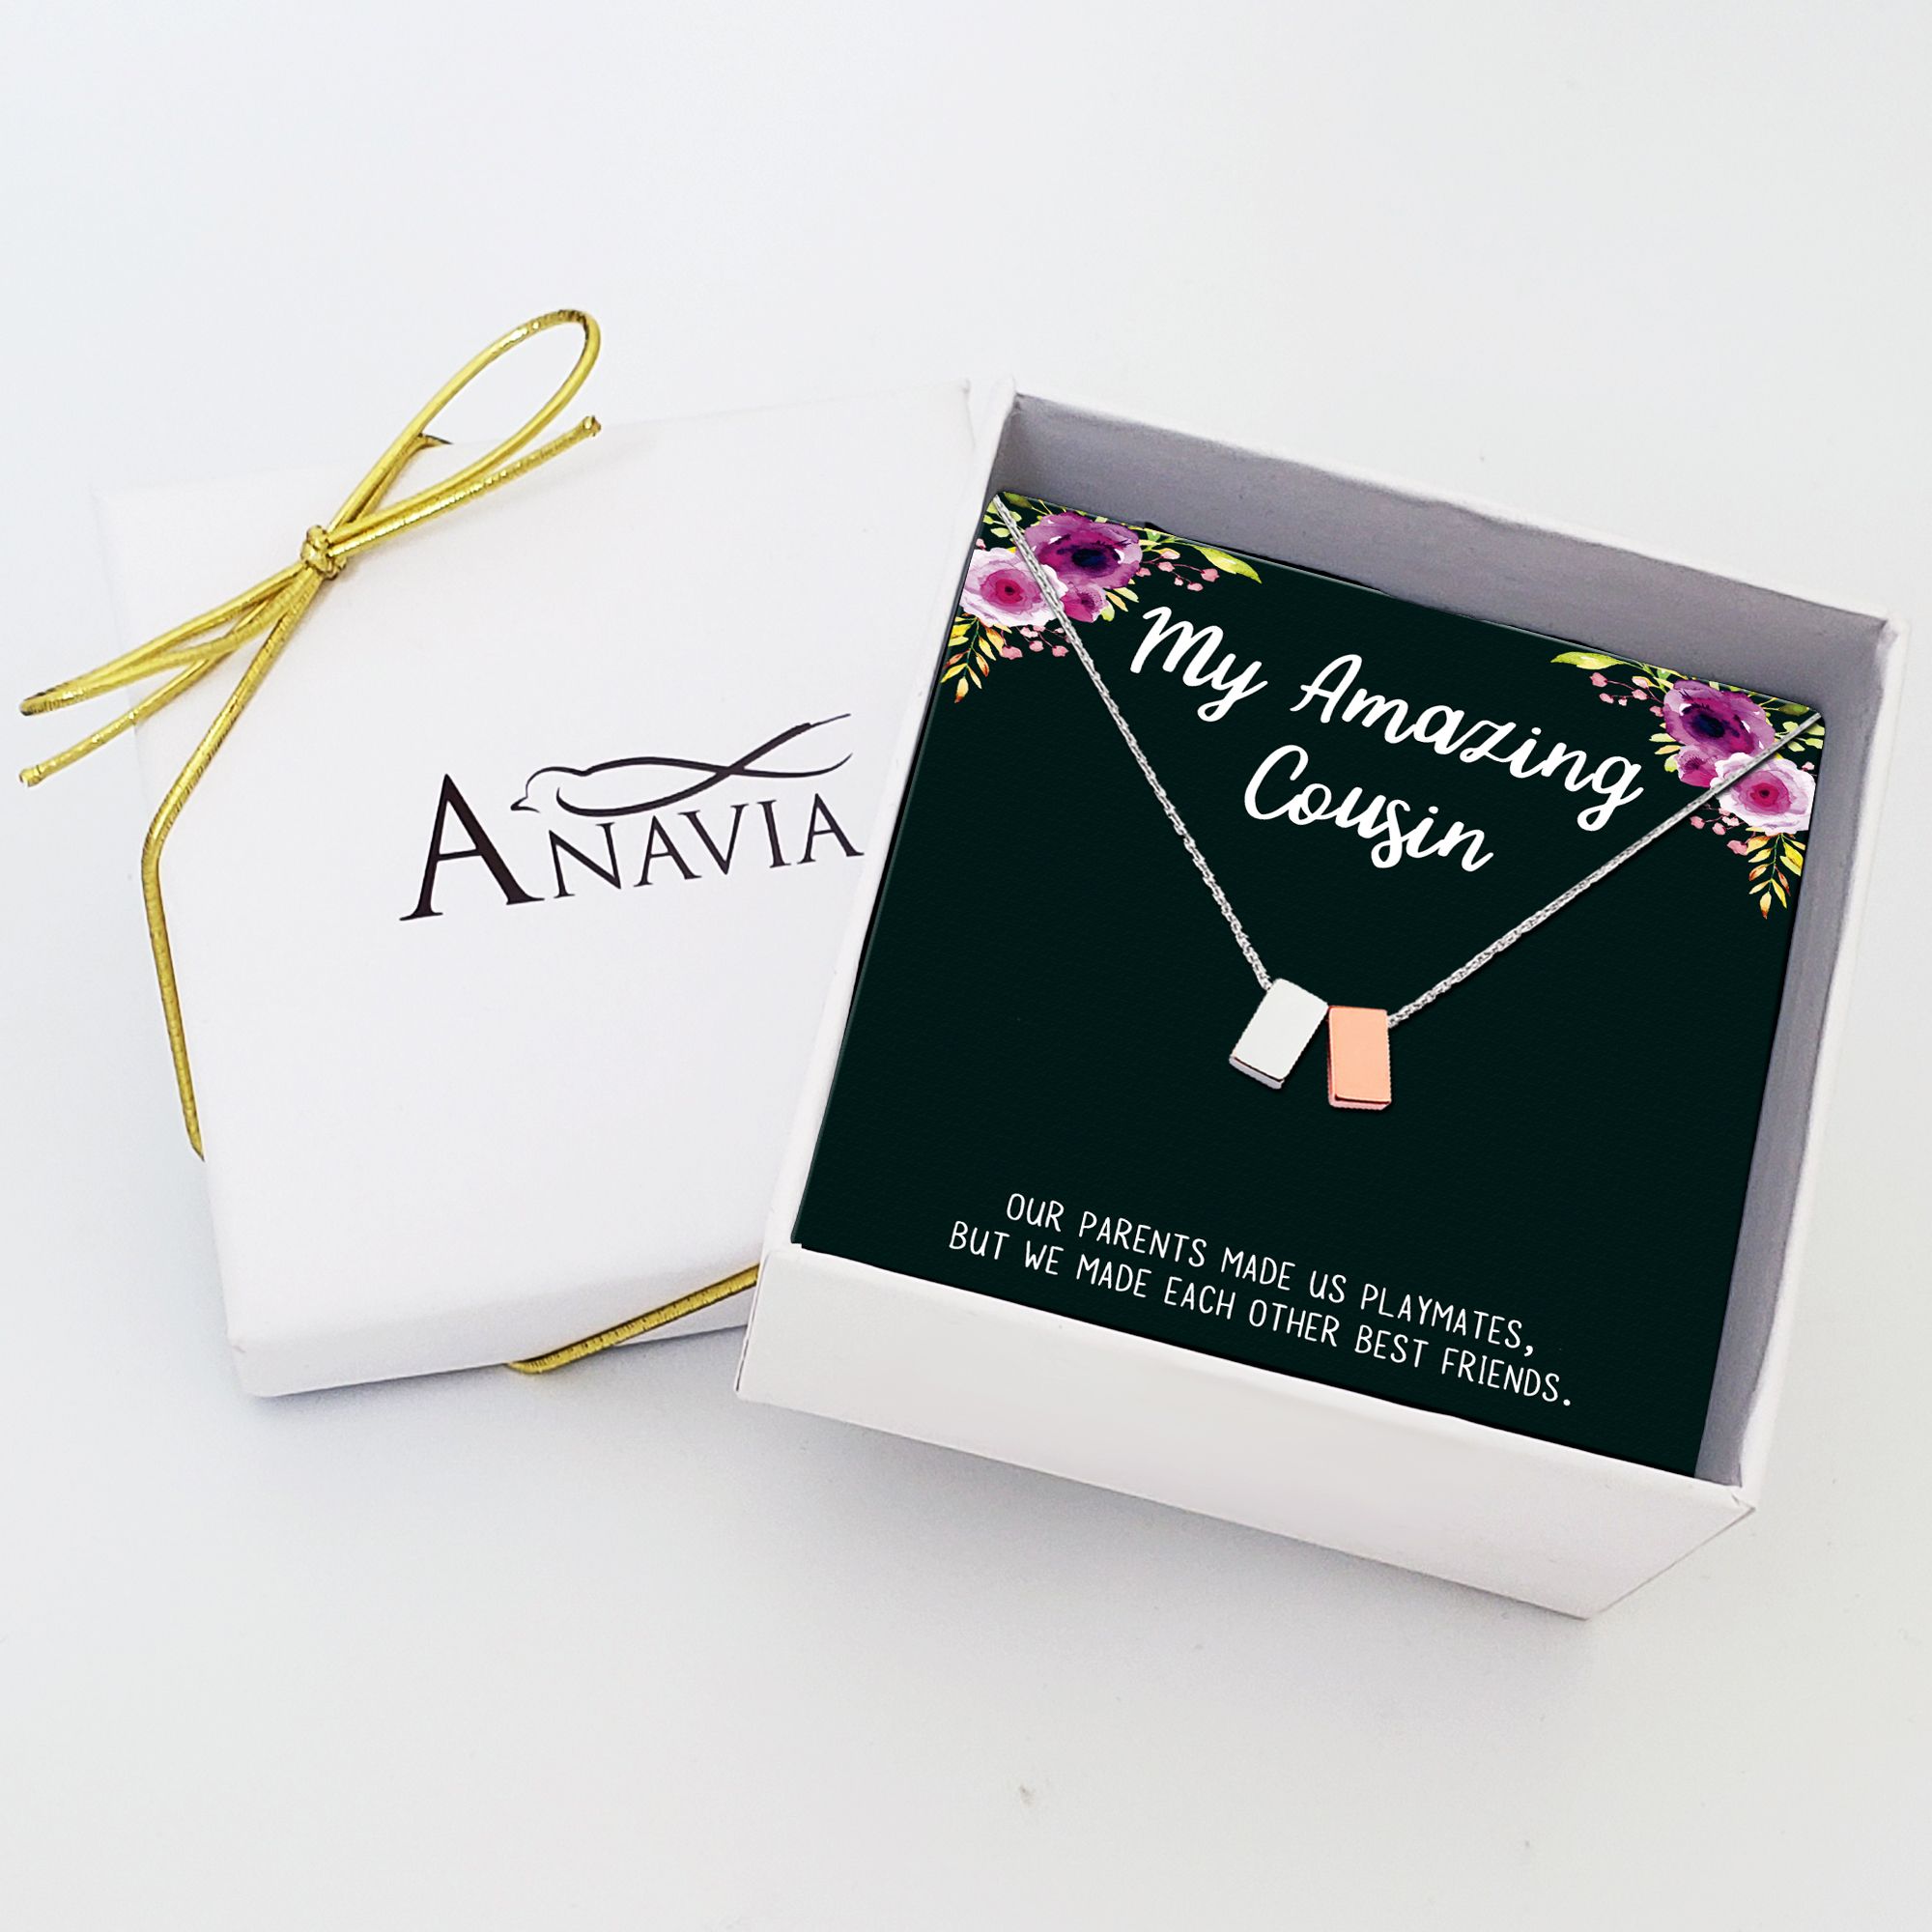 Anavia My Amazing Cousin Necklace, Necklace with Card, Cousin Gifts, Jewelry Gift, Gift for Family, Gift for Cousin, Cousin Birthday Gift, Christmas Gift for Her [1 Silver & 1 Rose Gold] - image 2 of 2